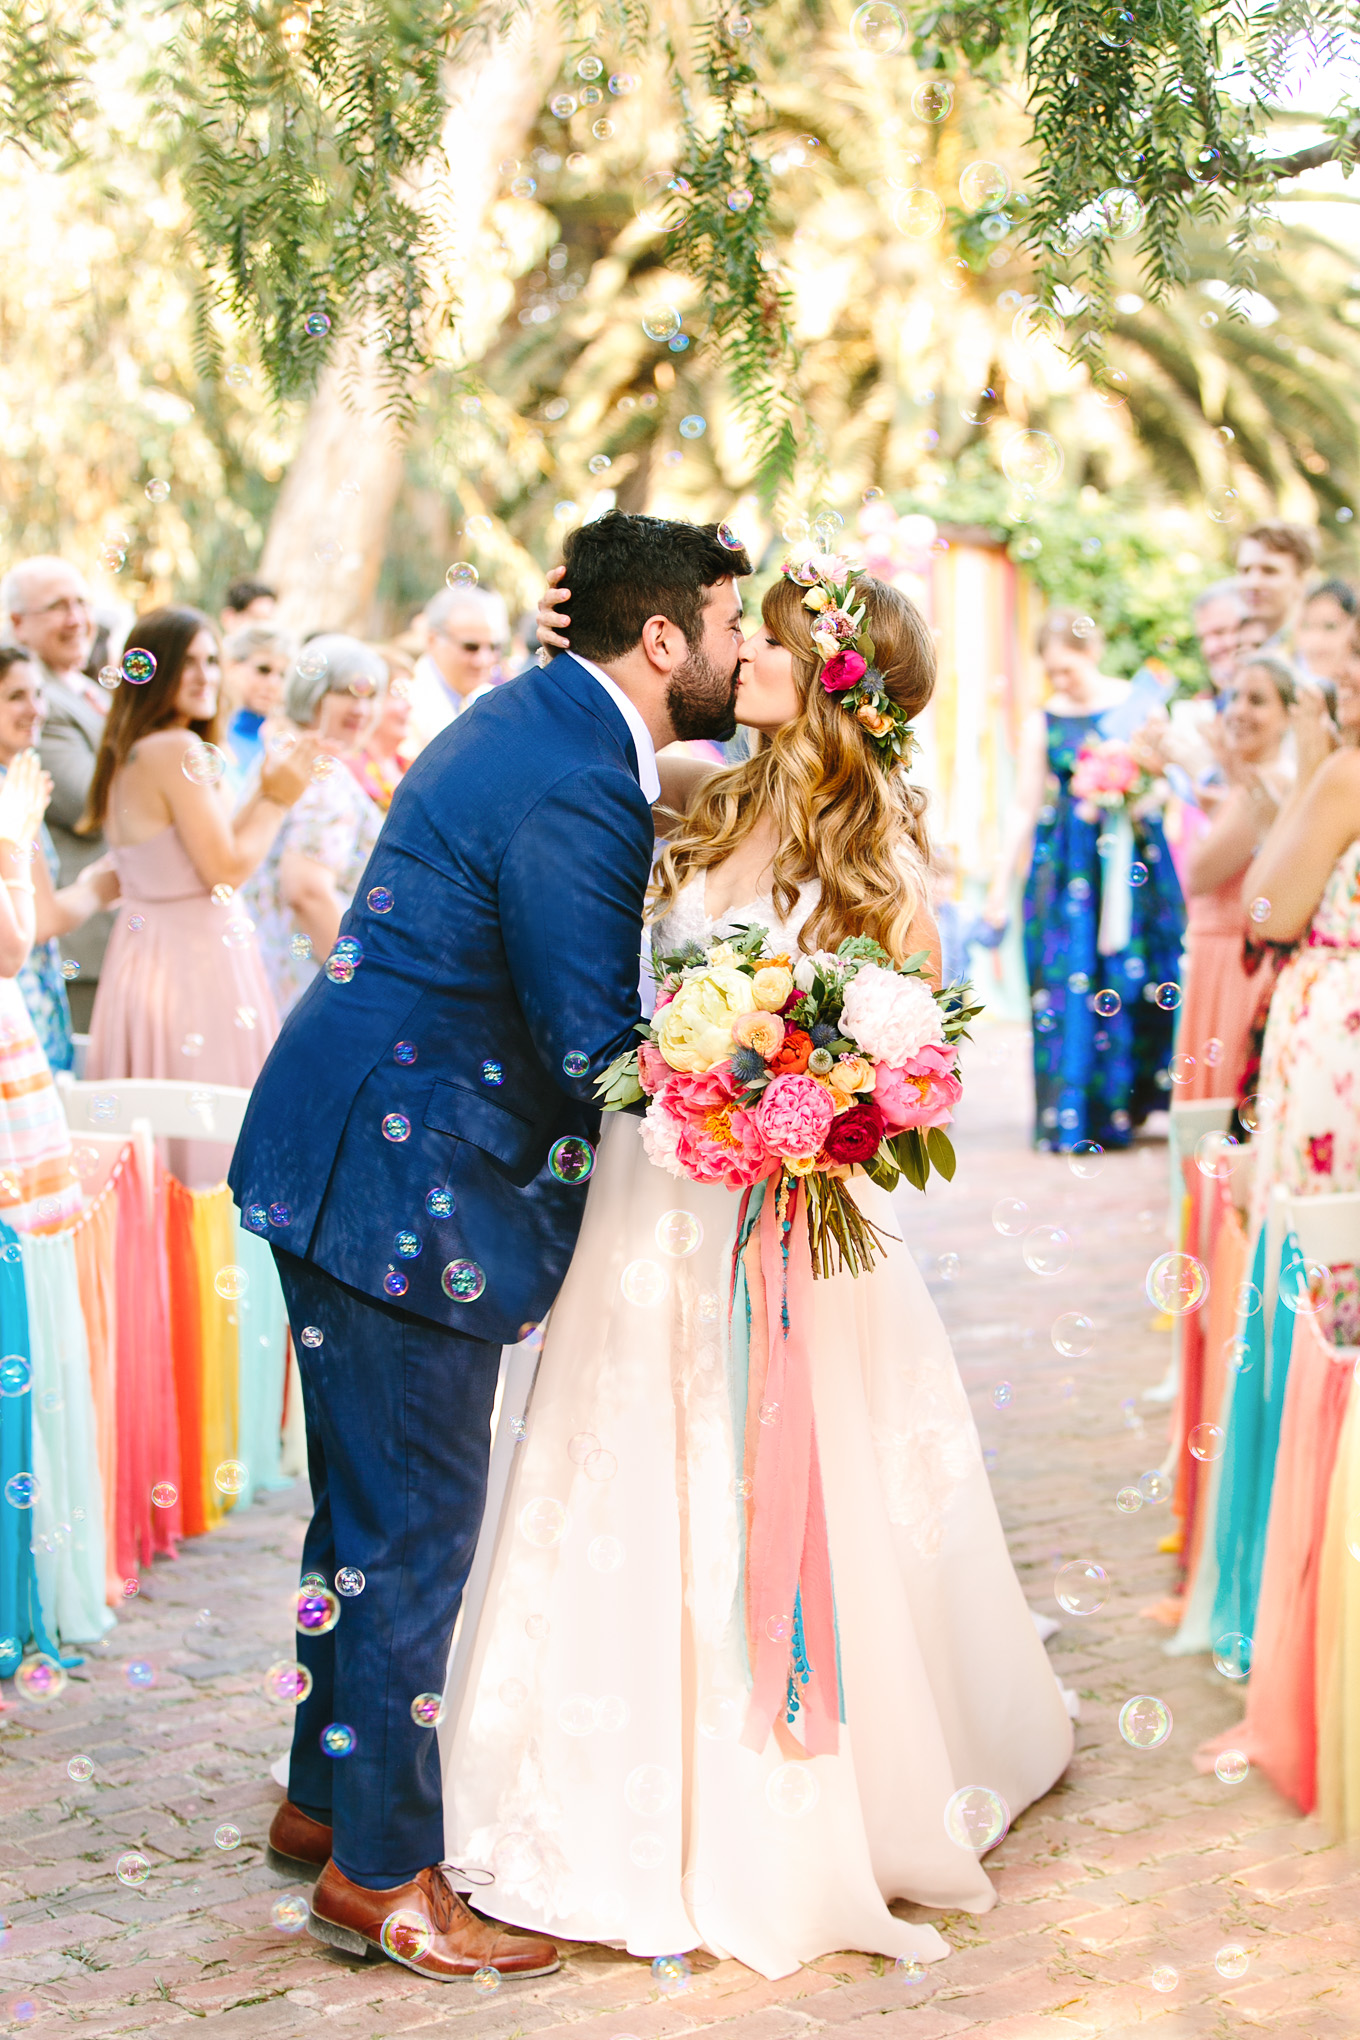 Bride and groom kissing at McCormick Home Ranch wedding ceremony | Best Southern California Garden Wedding Venues | Colorful and elevated wedding photography for fun-loving couples | #gardenvenue #weddingvenue #socalweddingvenue #bouquetideas #uniquebouquet   Source: Mary Costa Photography | Los Angeles 